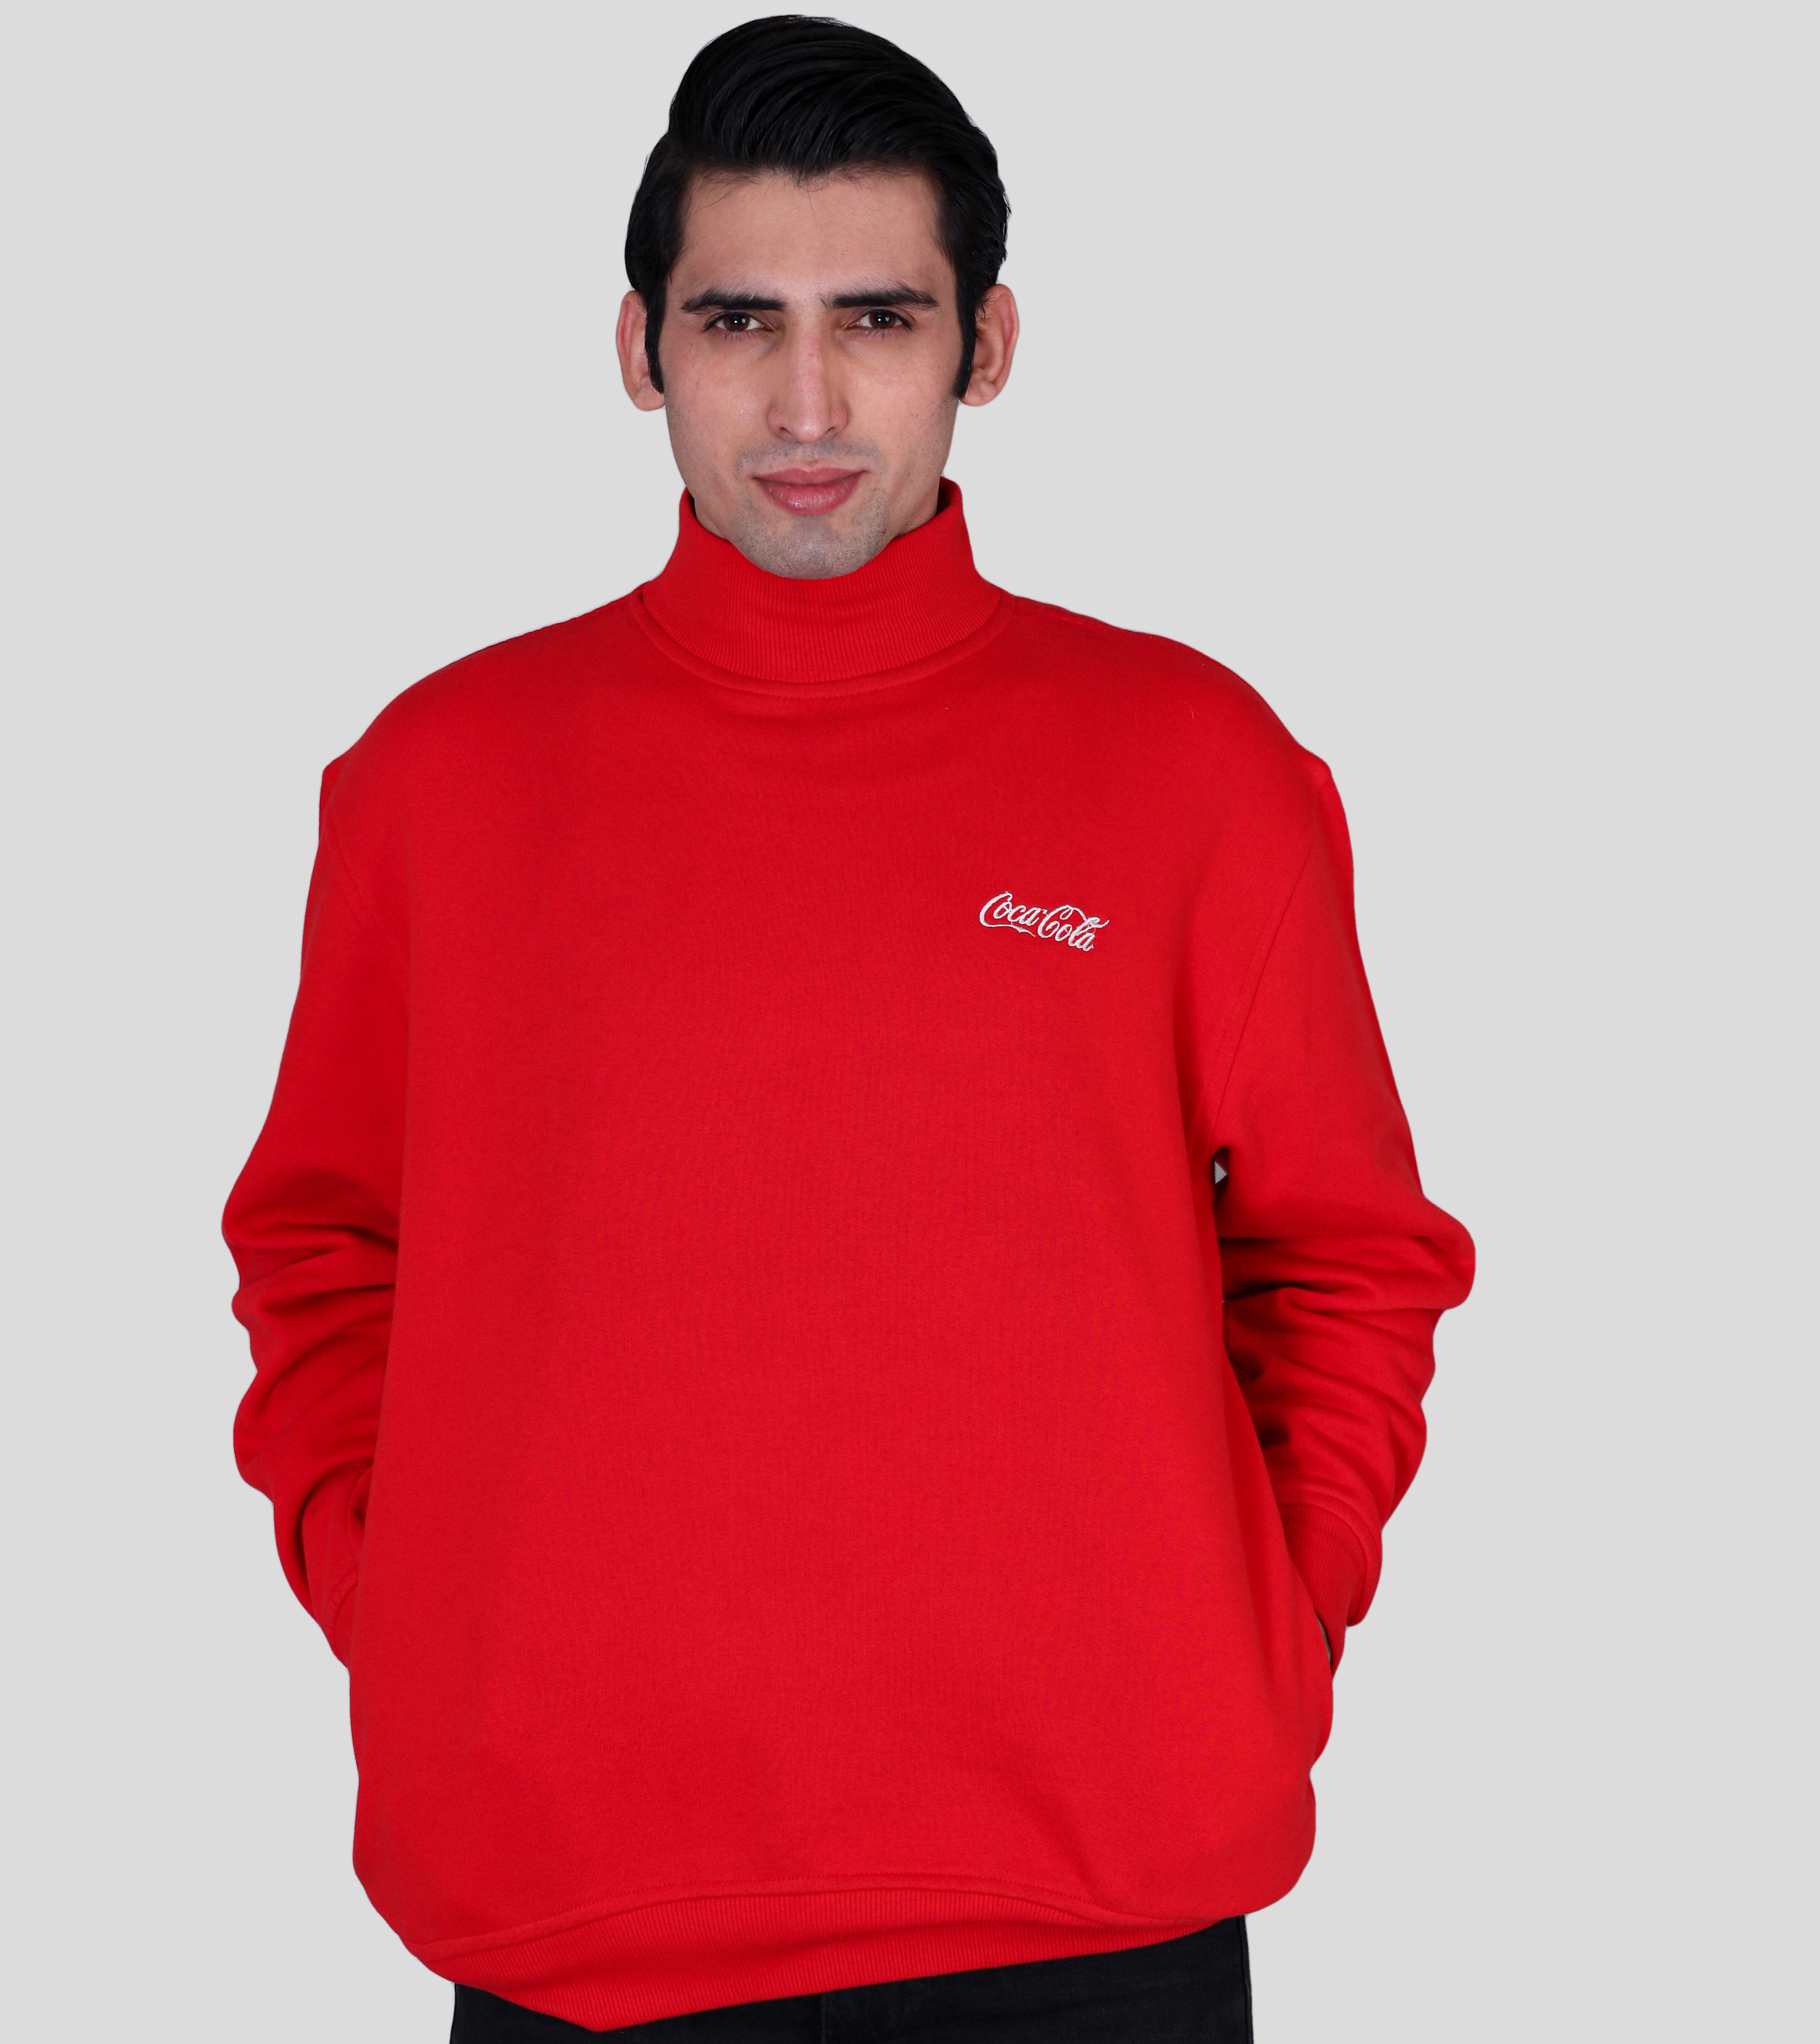 Promotional sweatshirts supplier and manufacturer